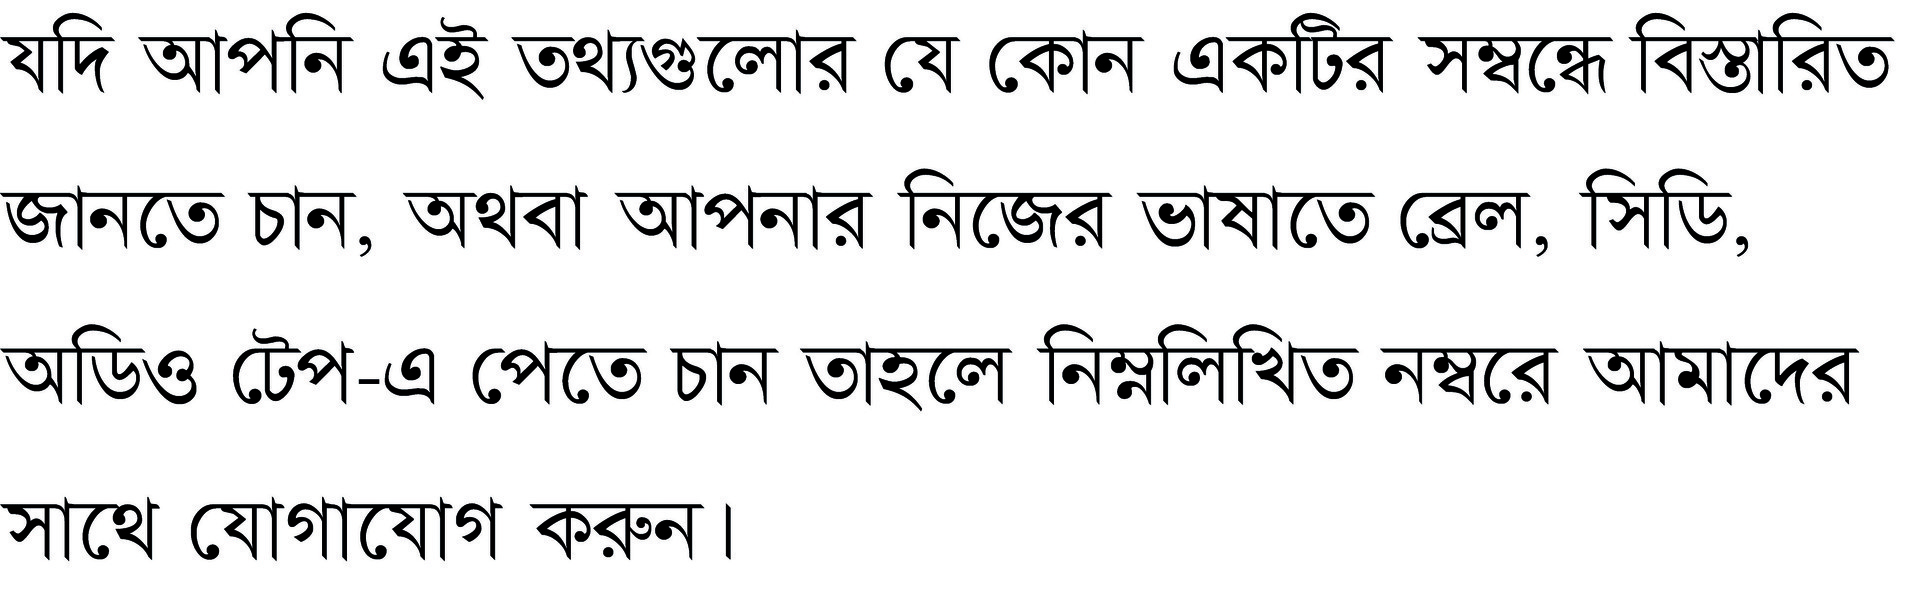 Translated in Bengali